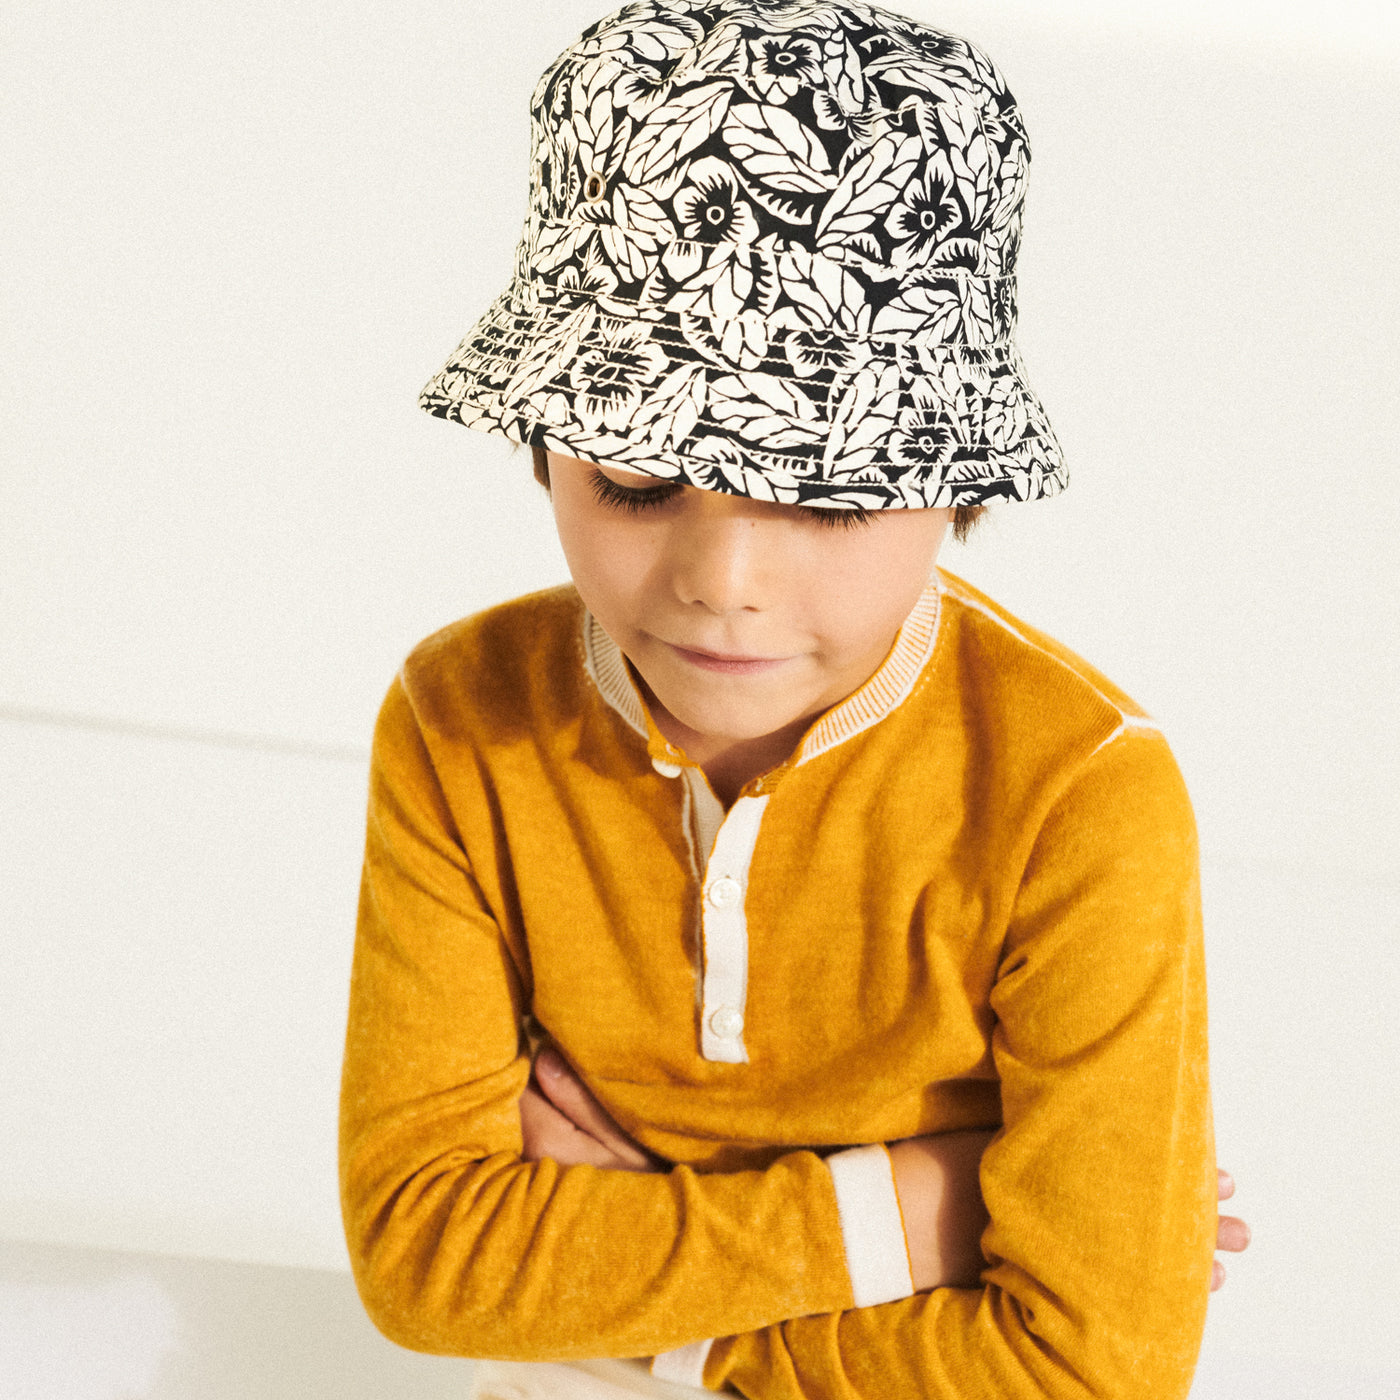 Boy with arms crossed wearing a yellow shirt and black and white printed hat from Bonpoint Spring Summer 2022 Collection